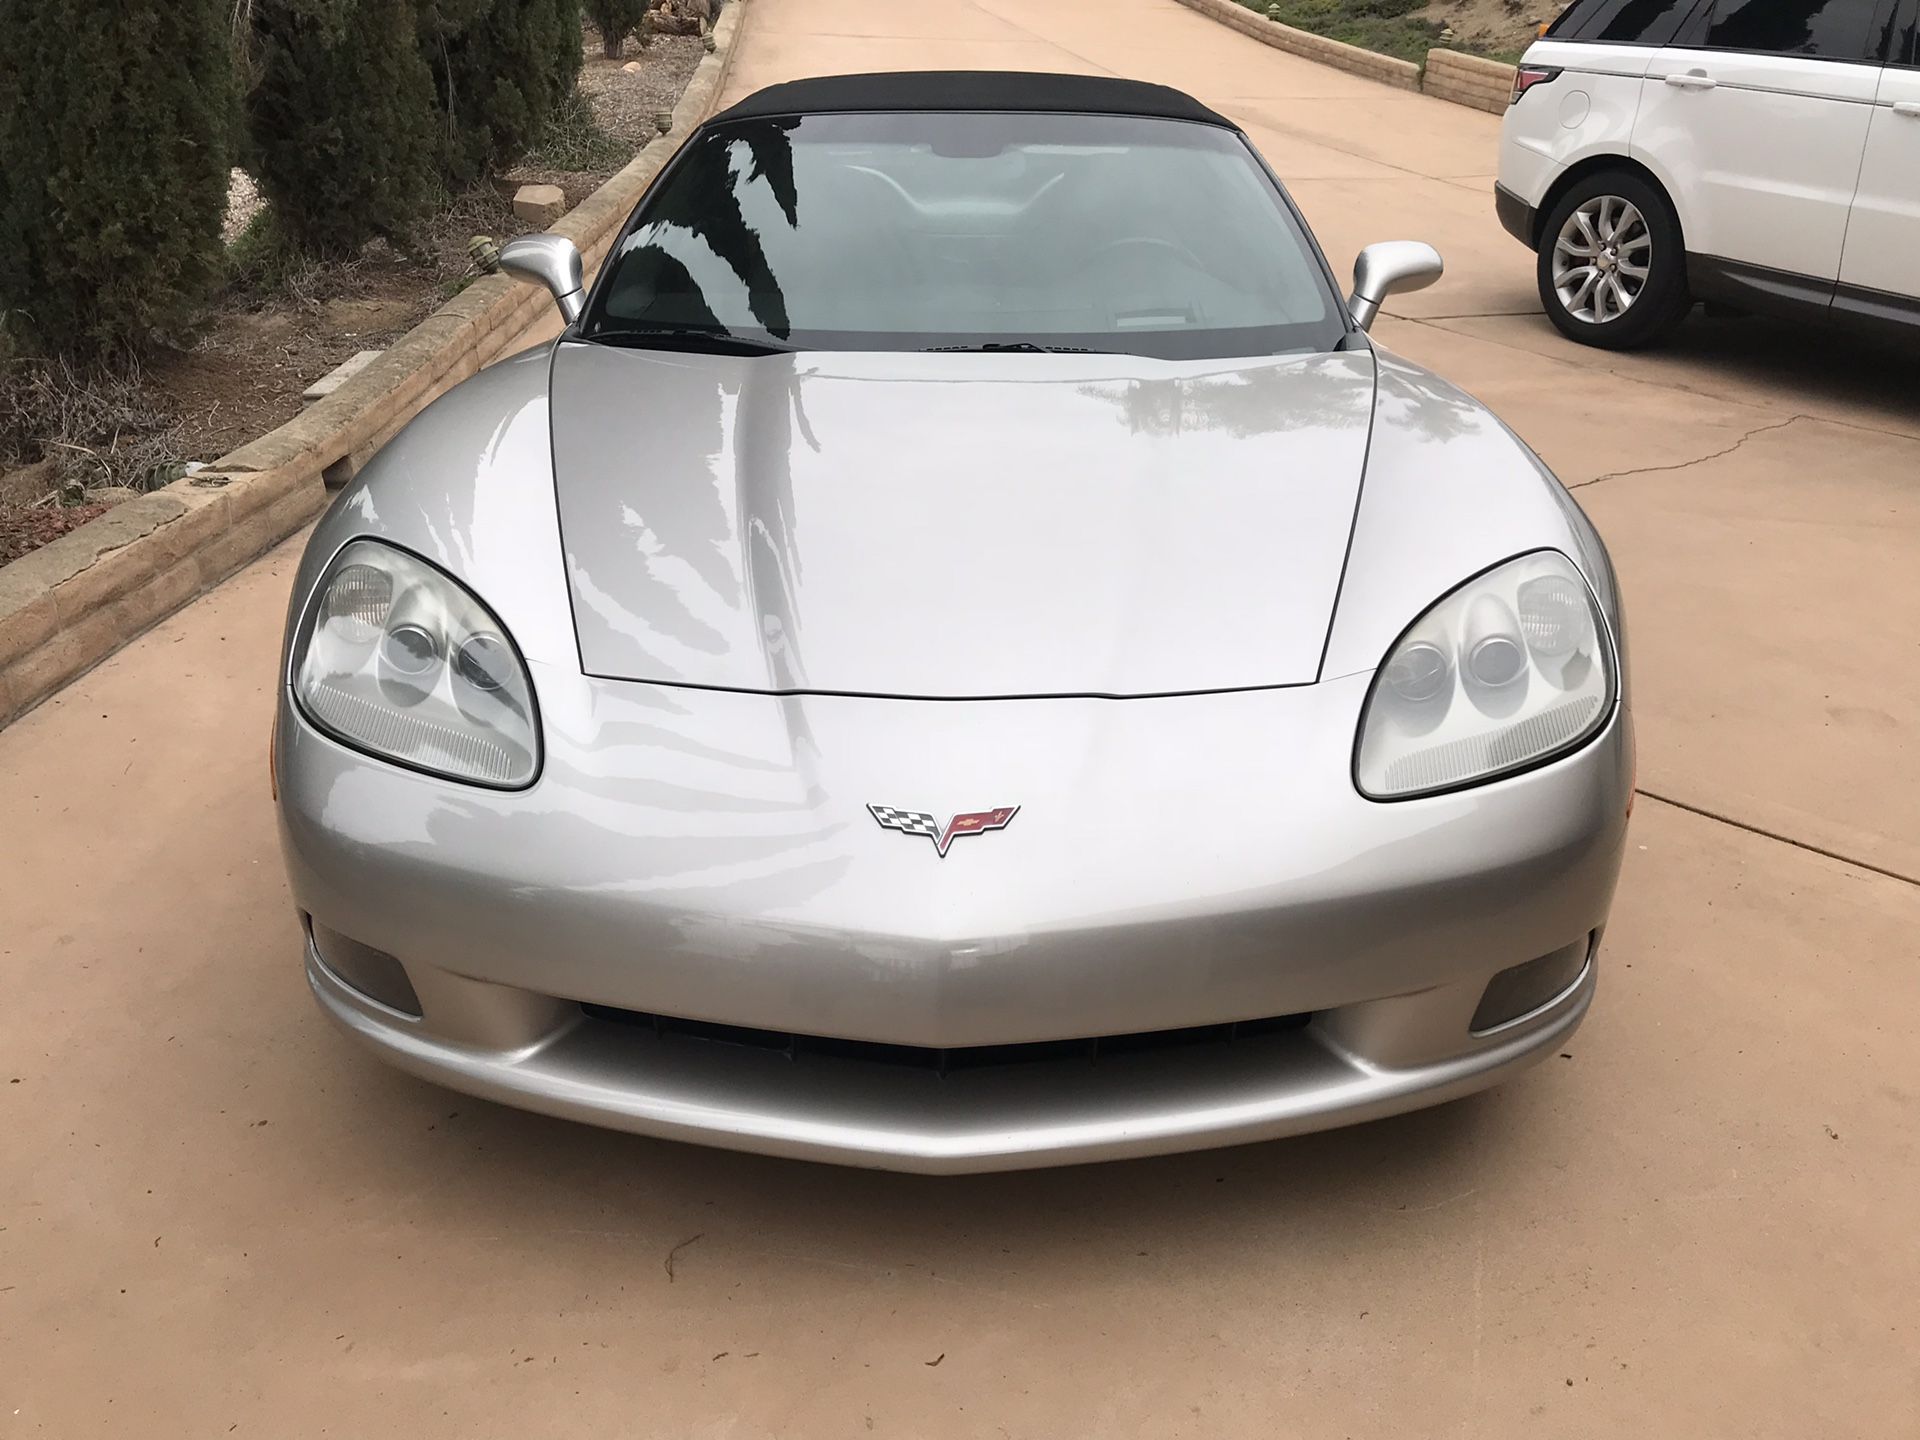 2006 Chevy Corvette...Must see